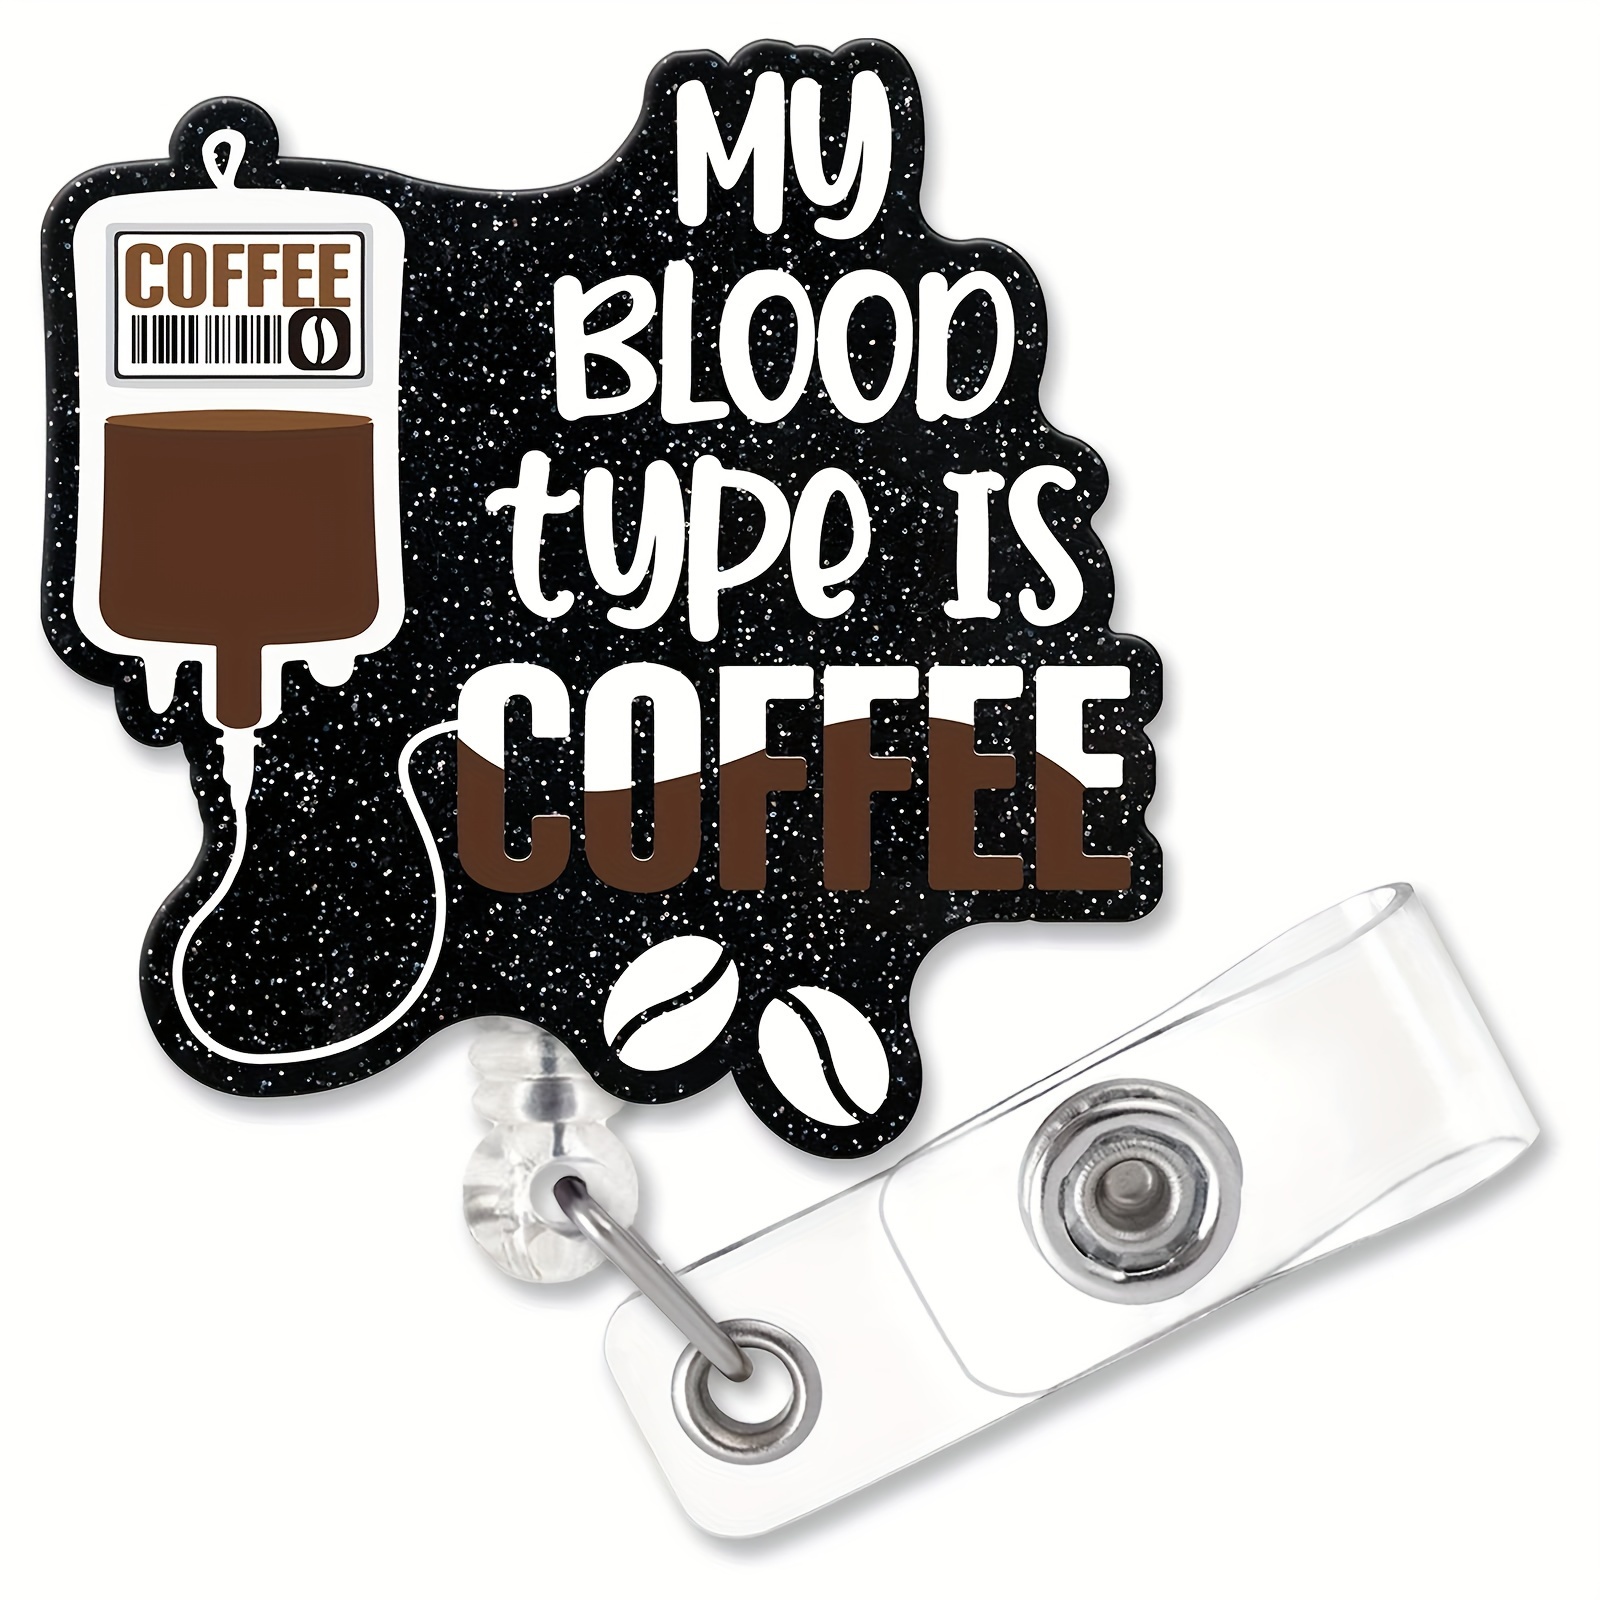 ZBBFSCSB My Blood Type is Coffee Funny Shaped Badge Reel Holder with Metal  Shark Clip, Office Hospital Lab Work ID Tag, Badge Gift for Doctor Nurse So